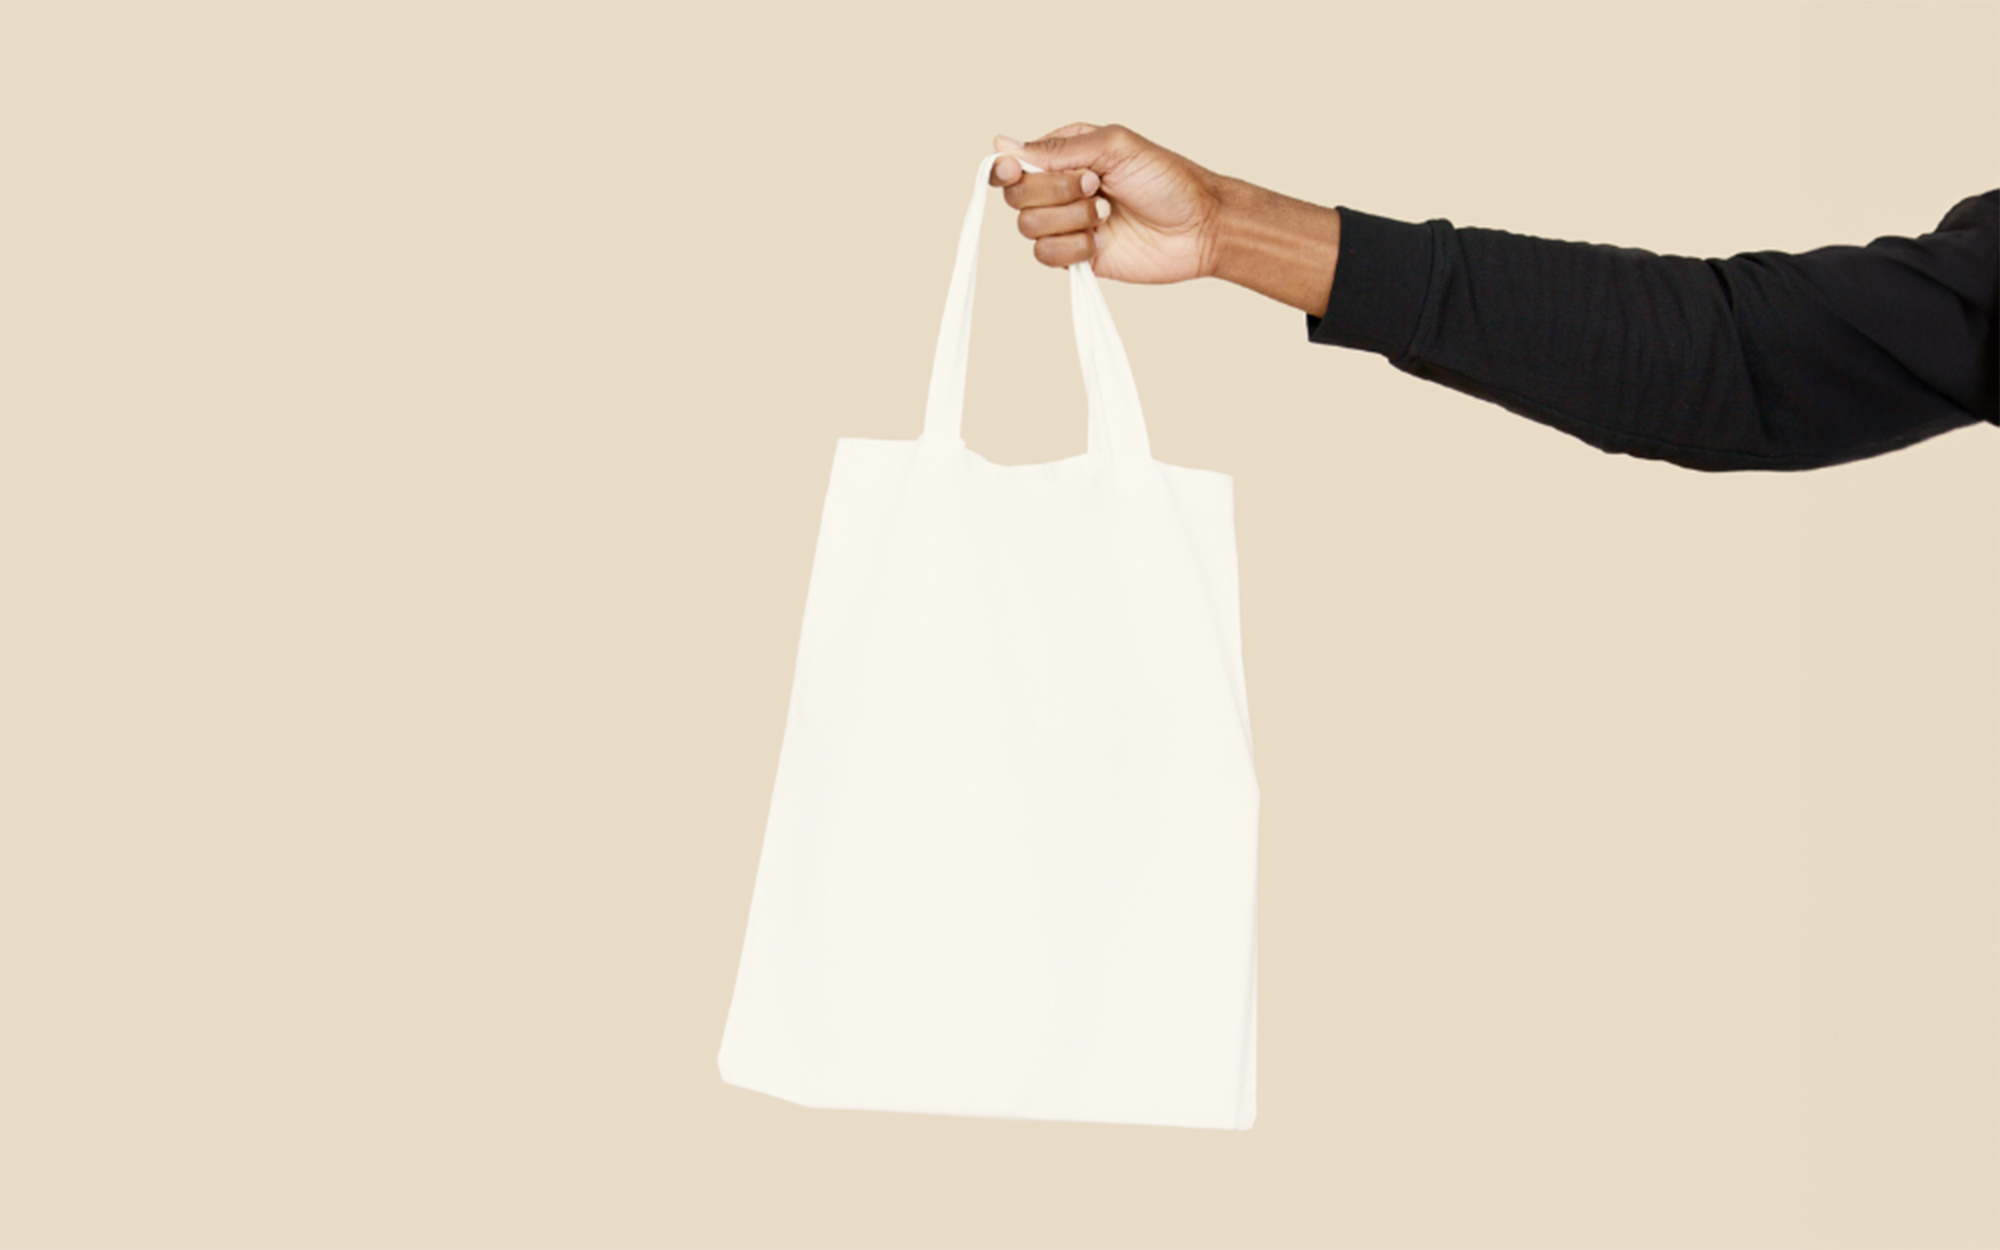 A person's arm is shown extending from the right side of the image, holding a white tote bag against a neutral background. The tote bag is a product made from recycled uniforms.